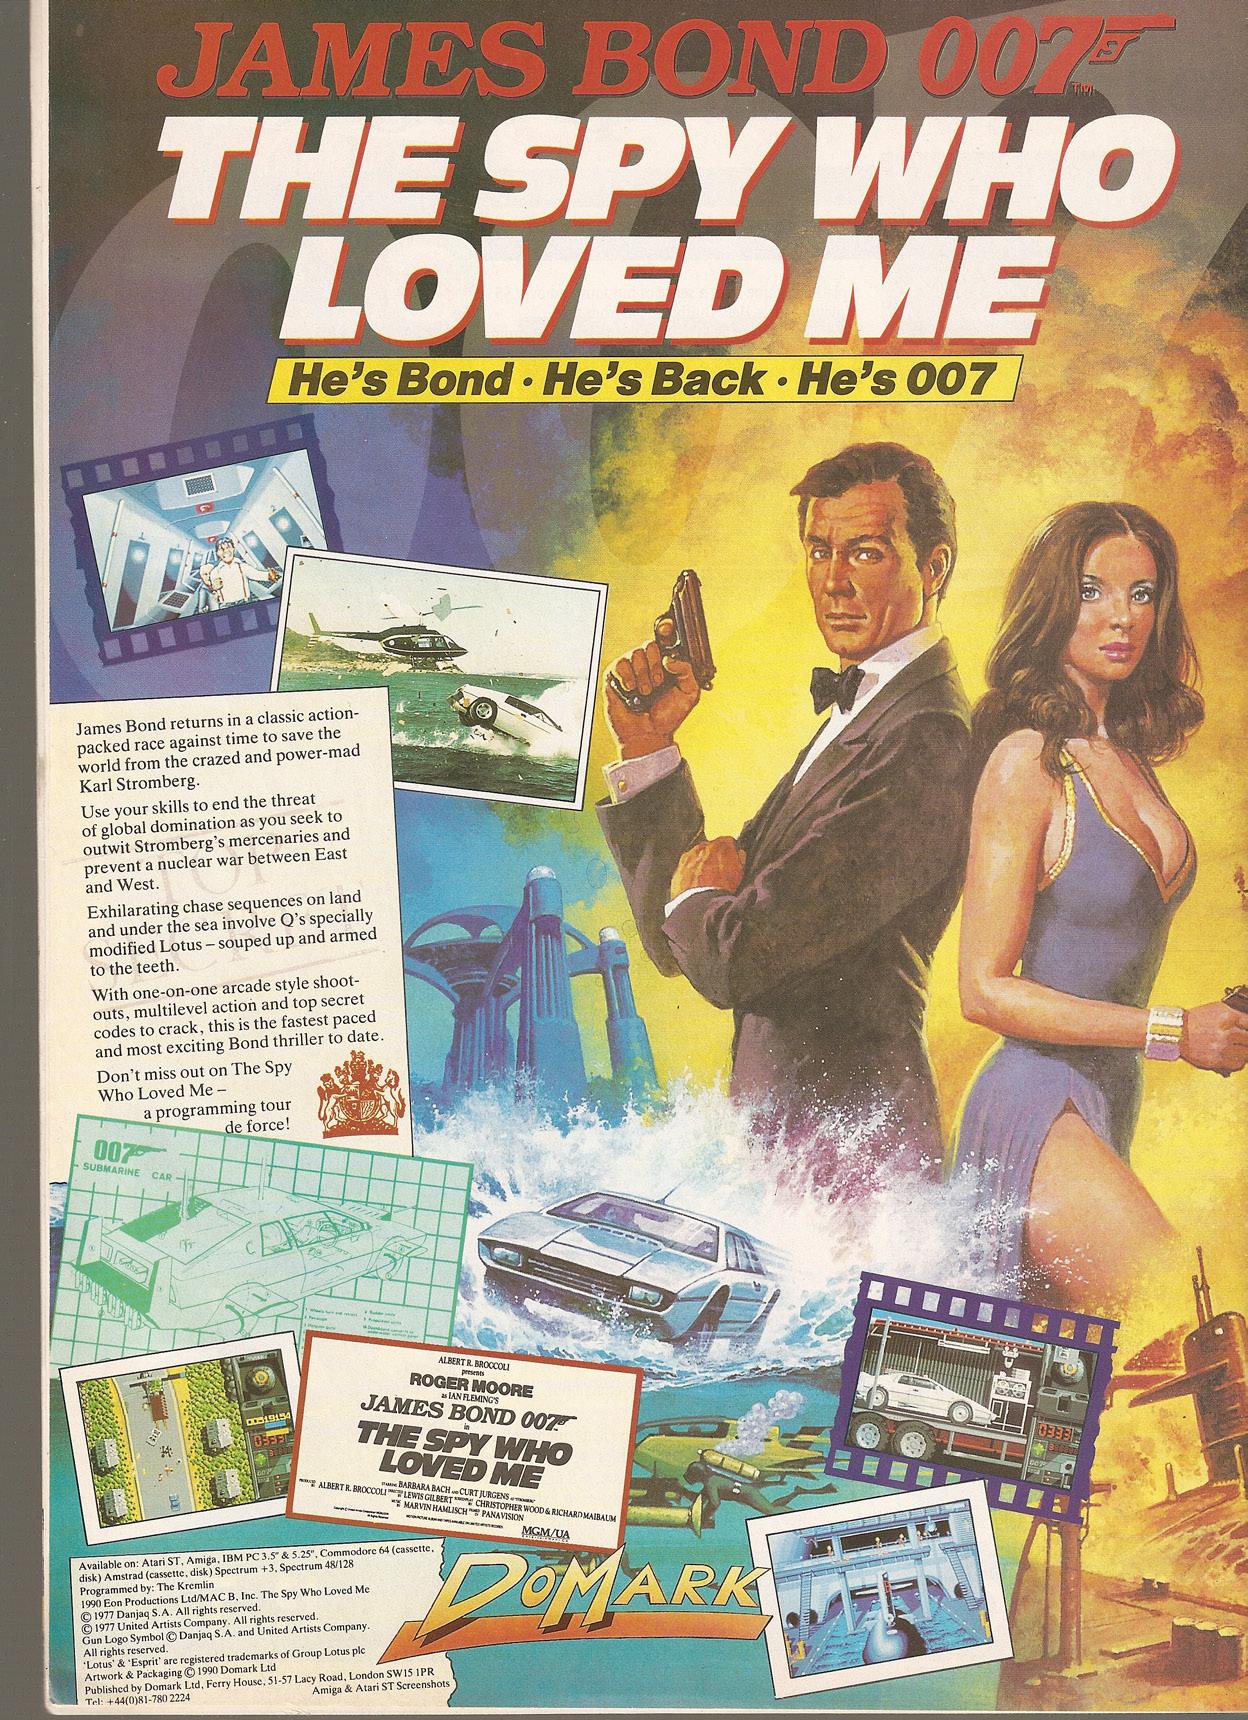 Ad poster for the Spy who loved me vintage video game